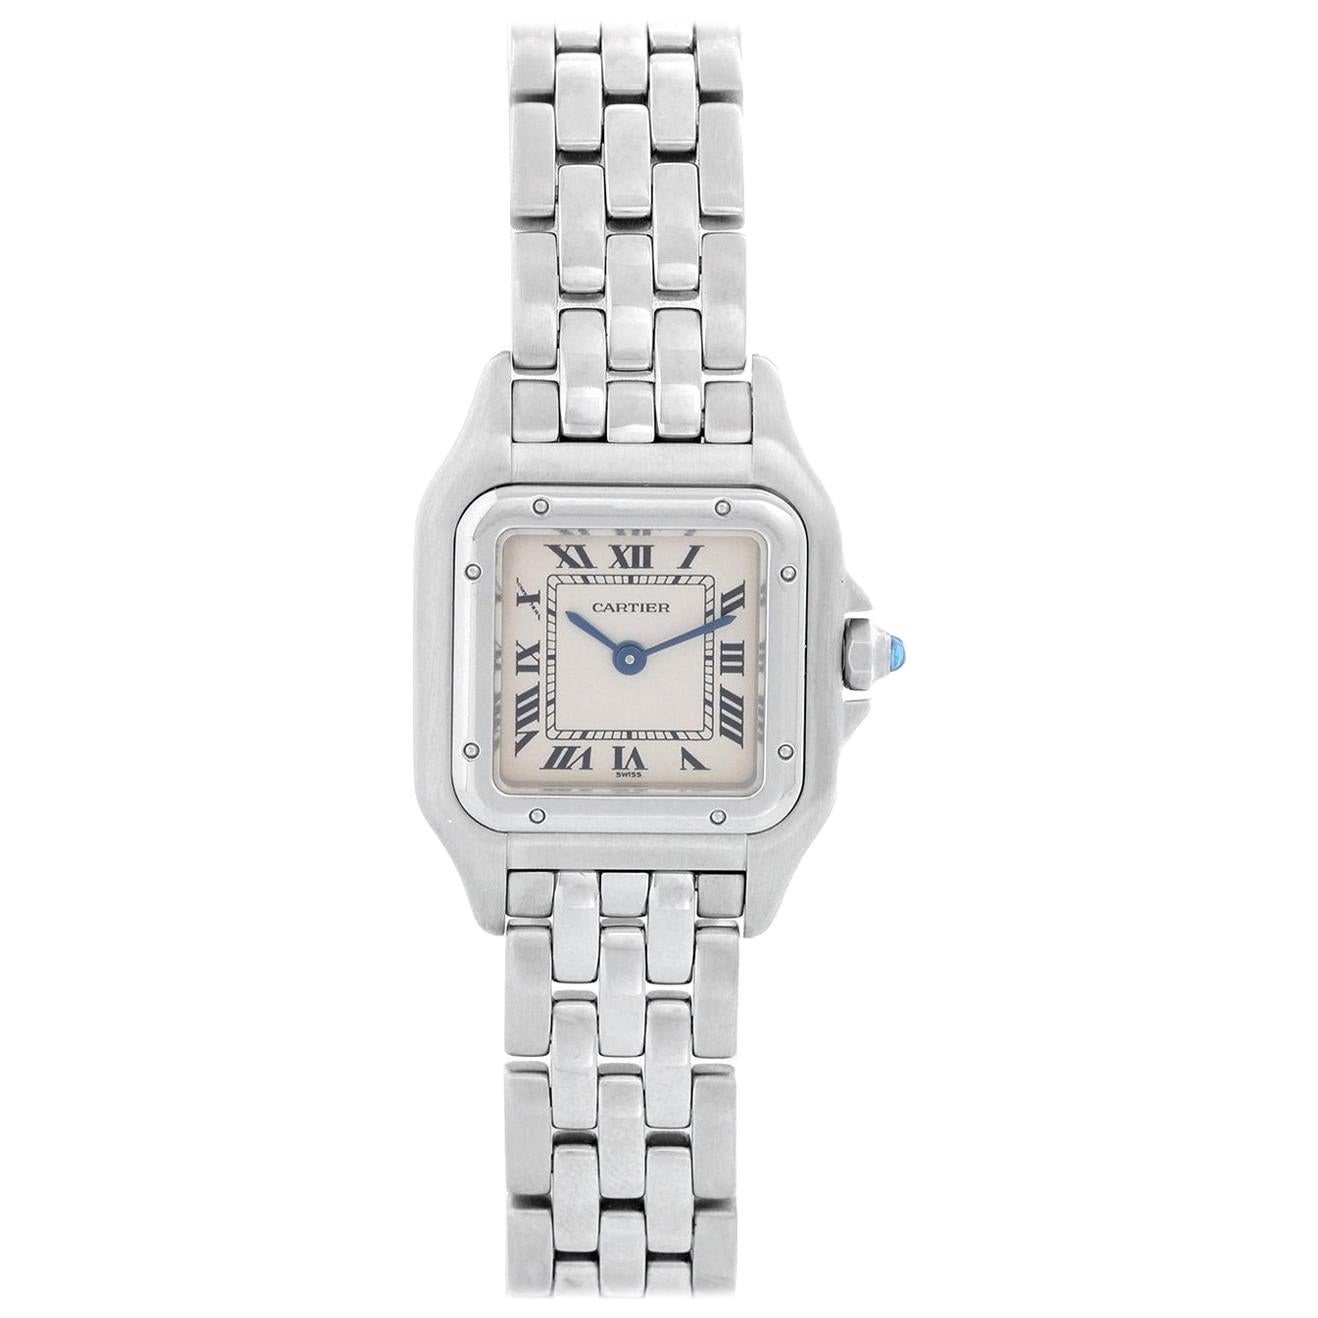 Cartier Panther Ladies Stainless Steel Panthere Watch W25033P5 1320